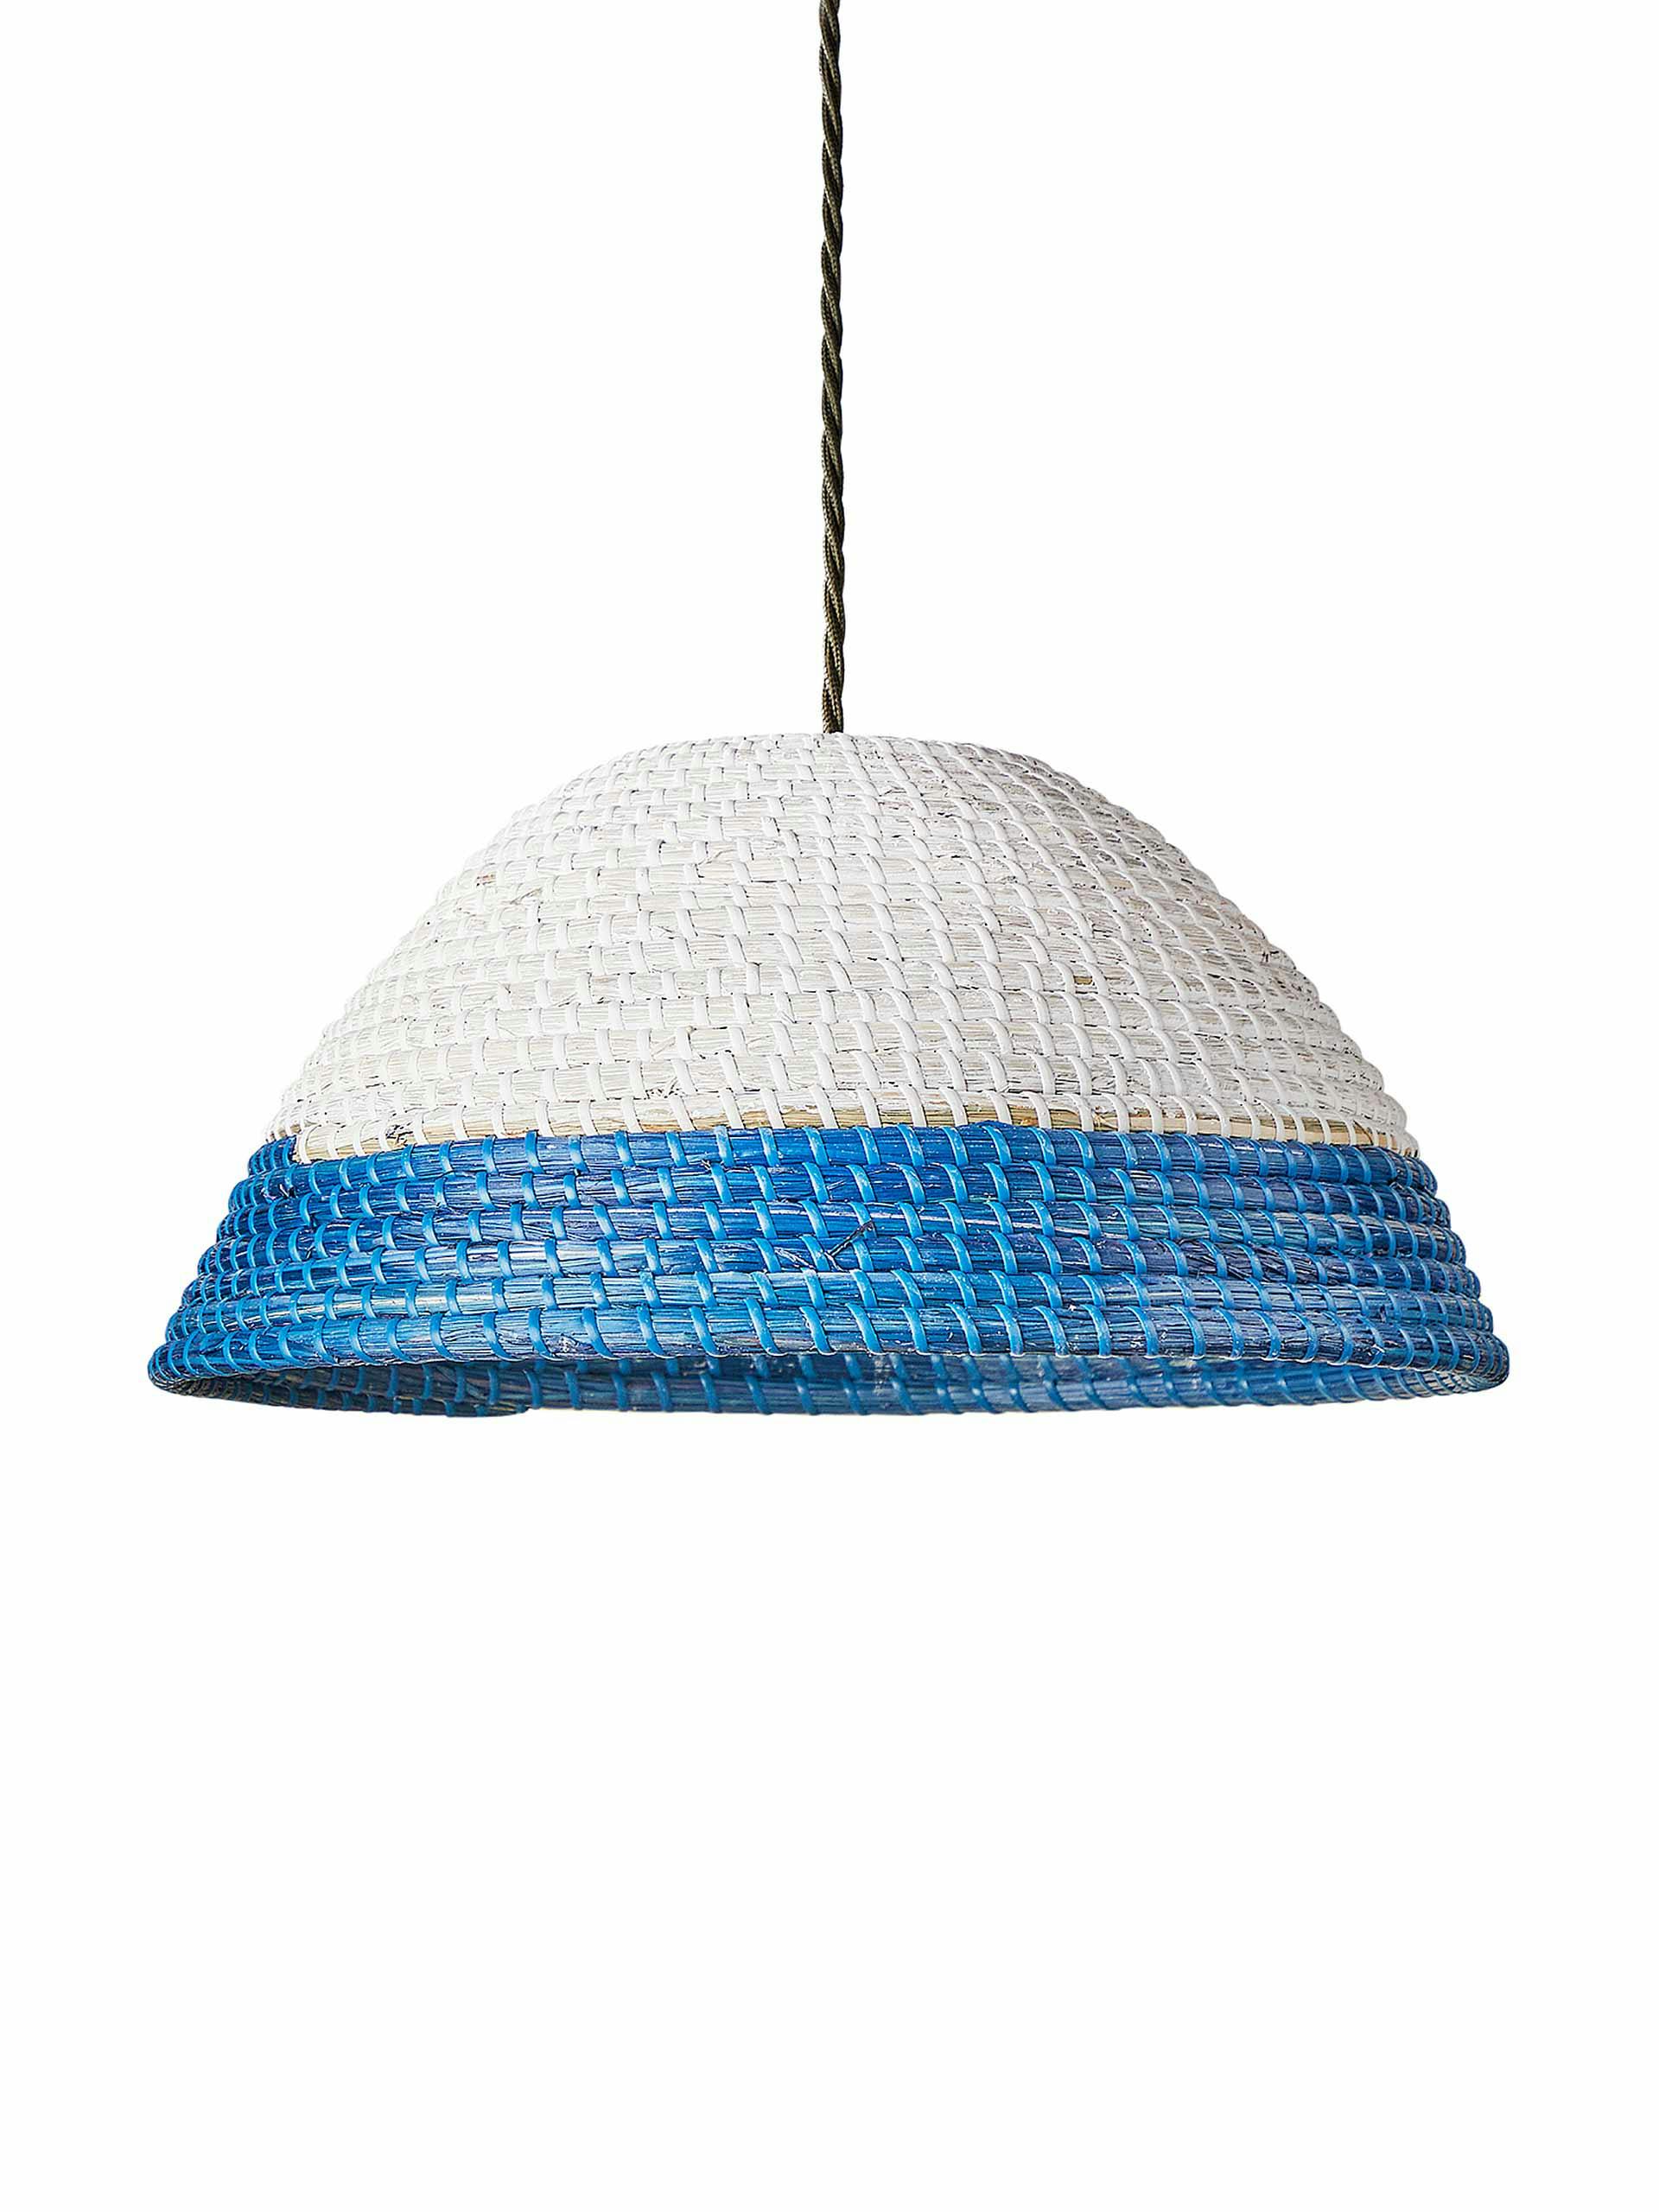 White and blue seagrass pendant shade